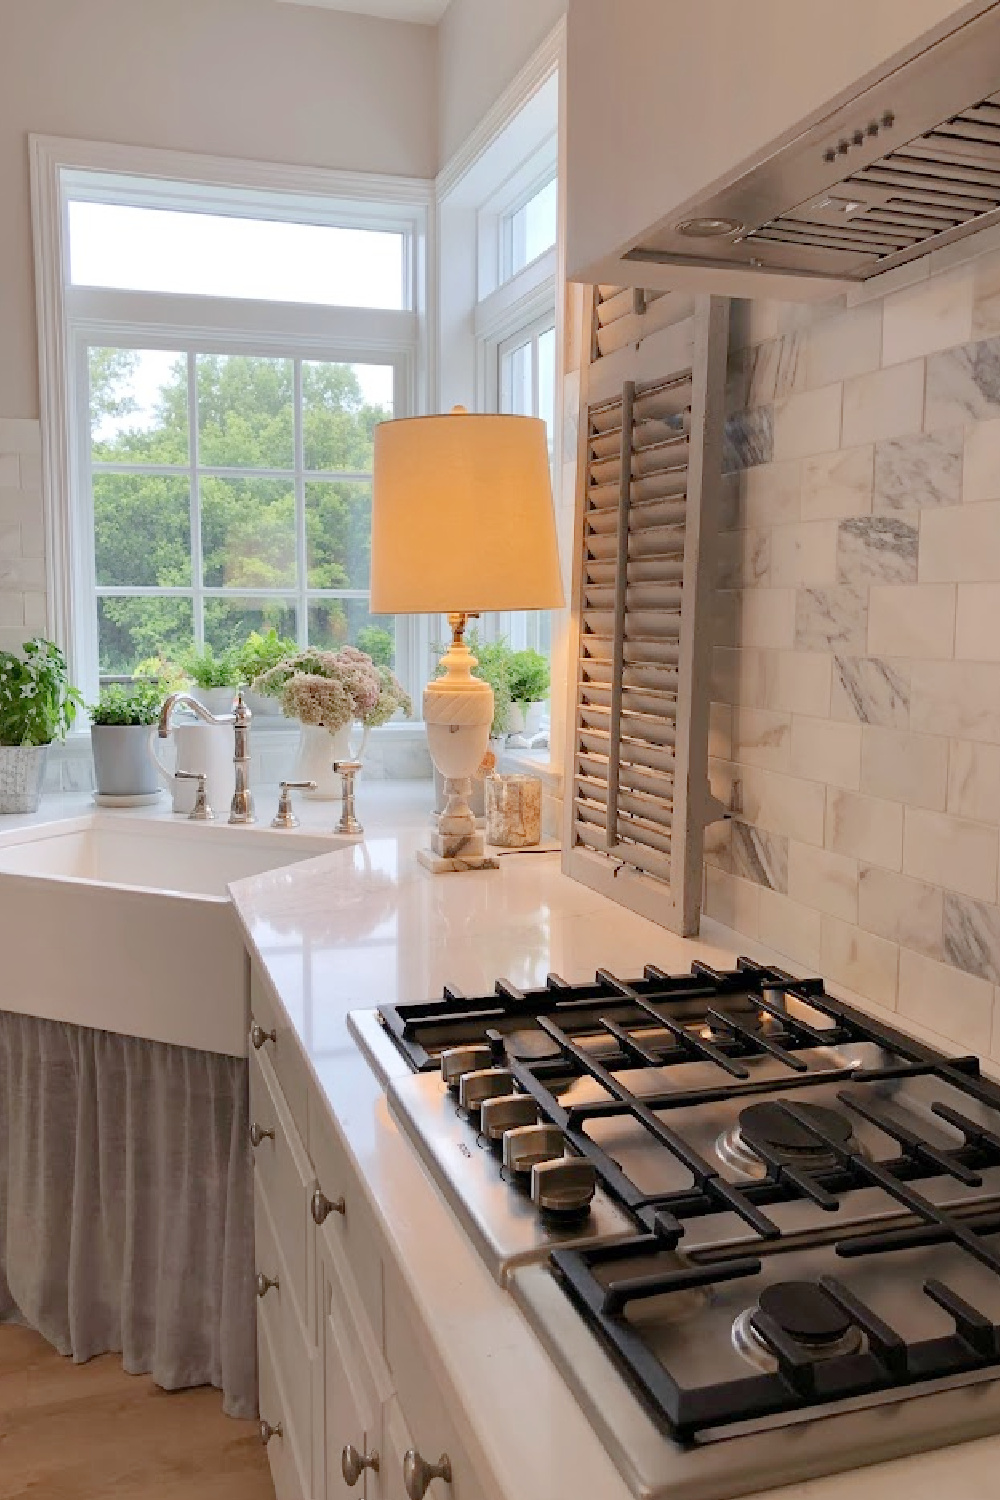 Our renovated kitchen with Viatera Muse quartz counters, calacatta gold marble backsplash, and light grey cabinets - Hello Lovely Studio.